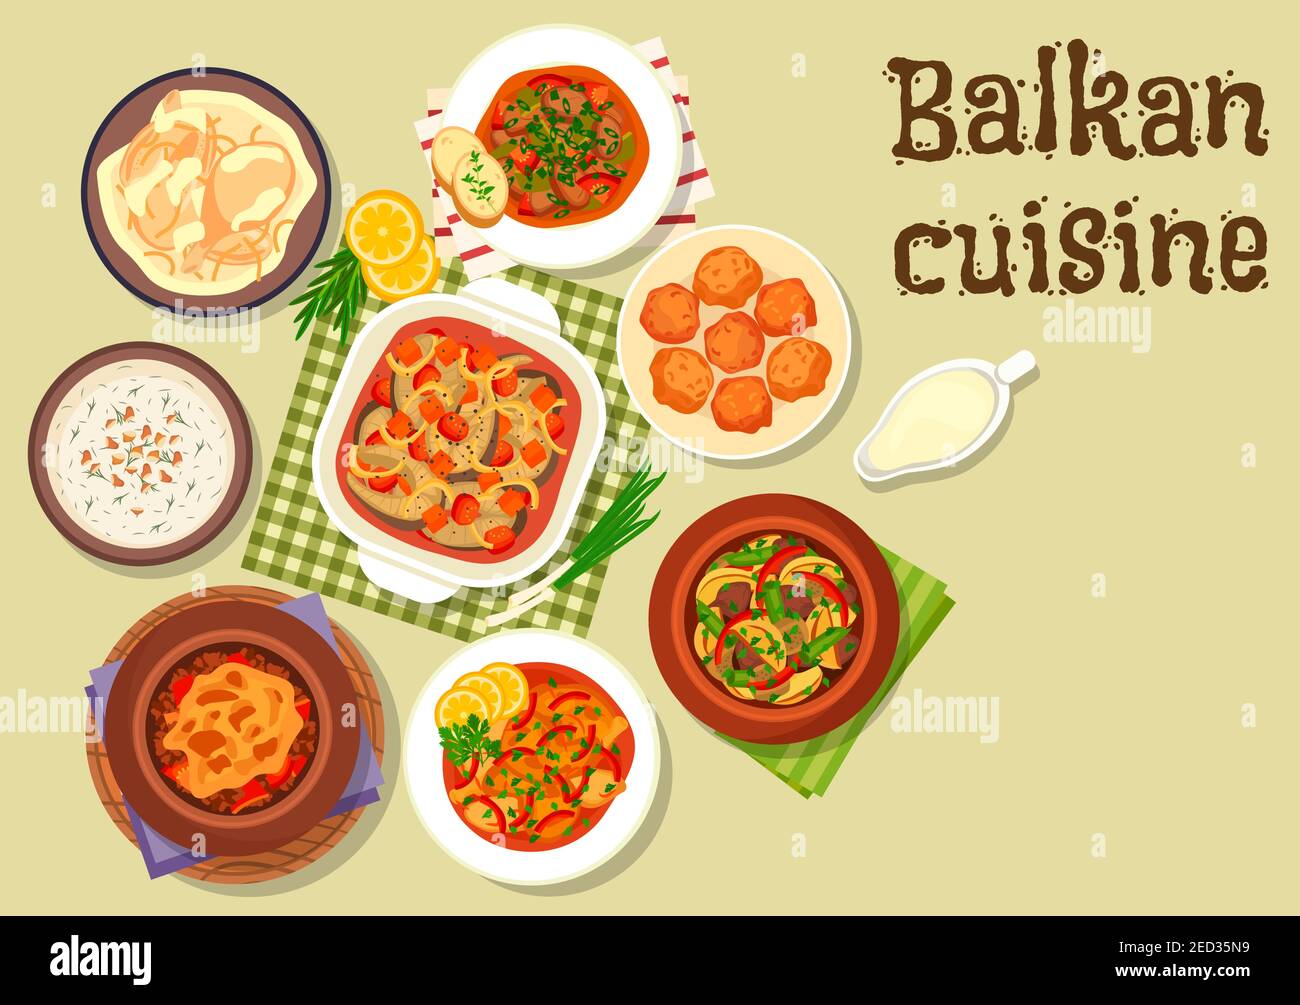 Balkan cuisine meat dishes icon with pepper pork stew, beef stew with cheese, baked fish with vegetables, lamb potato stew, chicken in sour cream, col Stock Vector